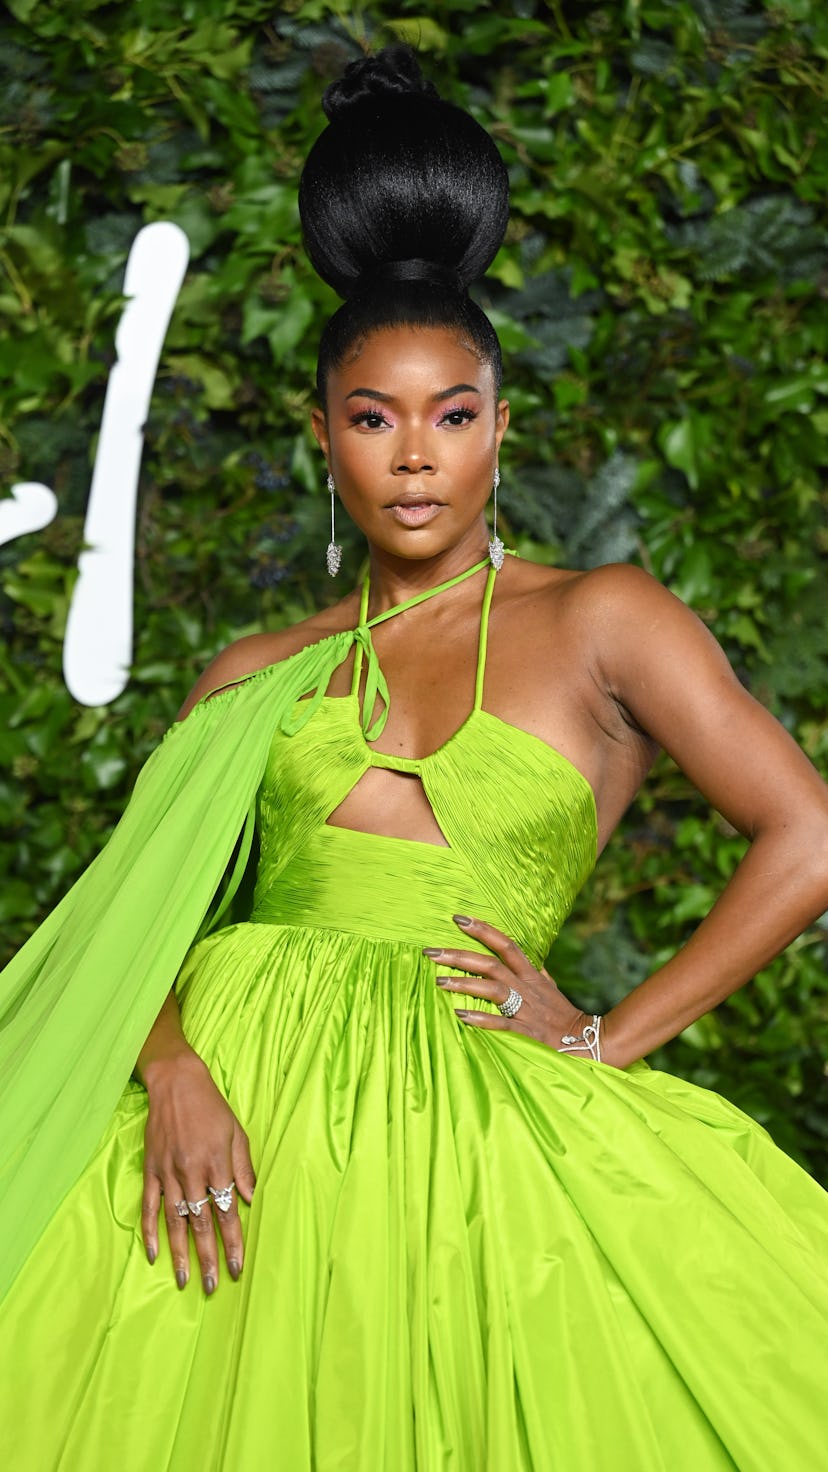 Gabrielle Union attends The Fashion Awards 2021 with an extra-large bun, one of the best hairstyles ...